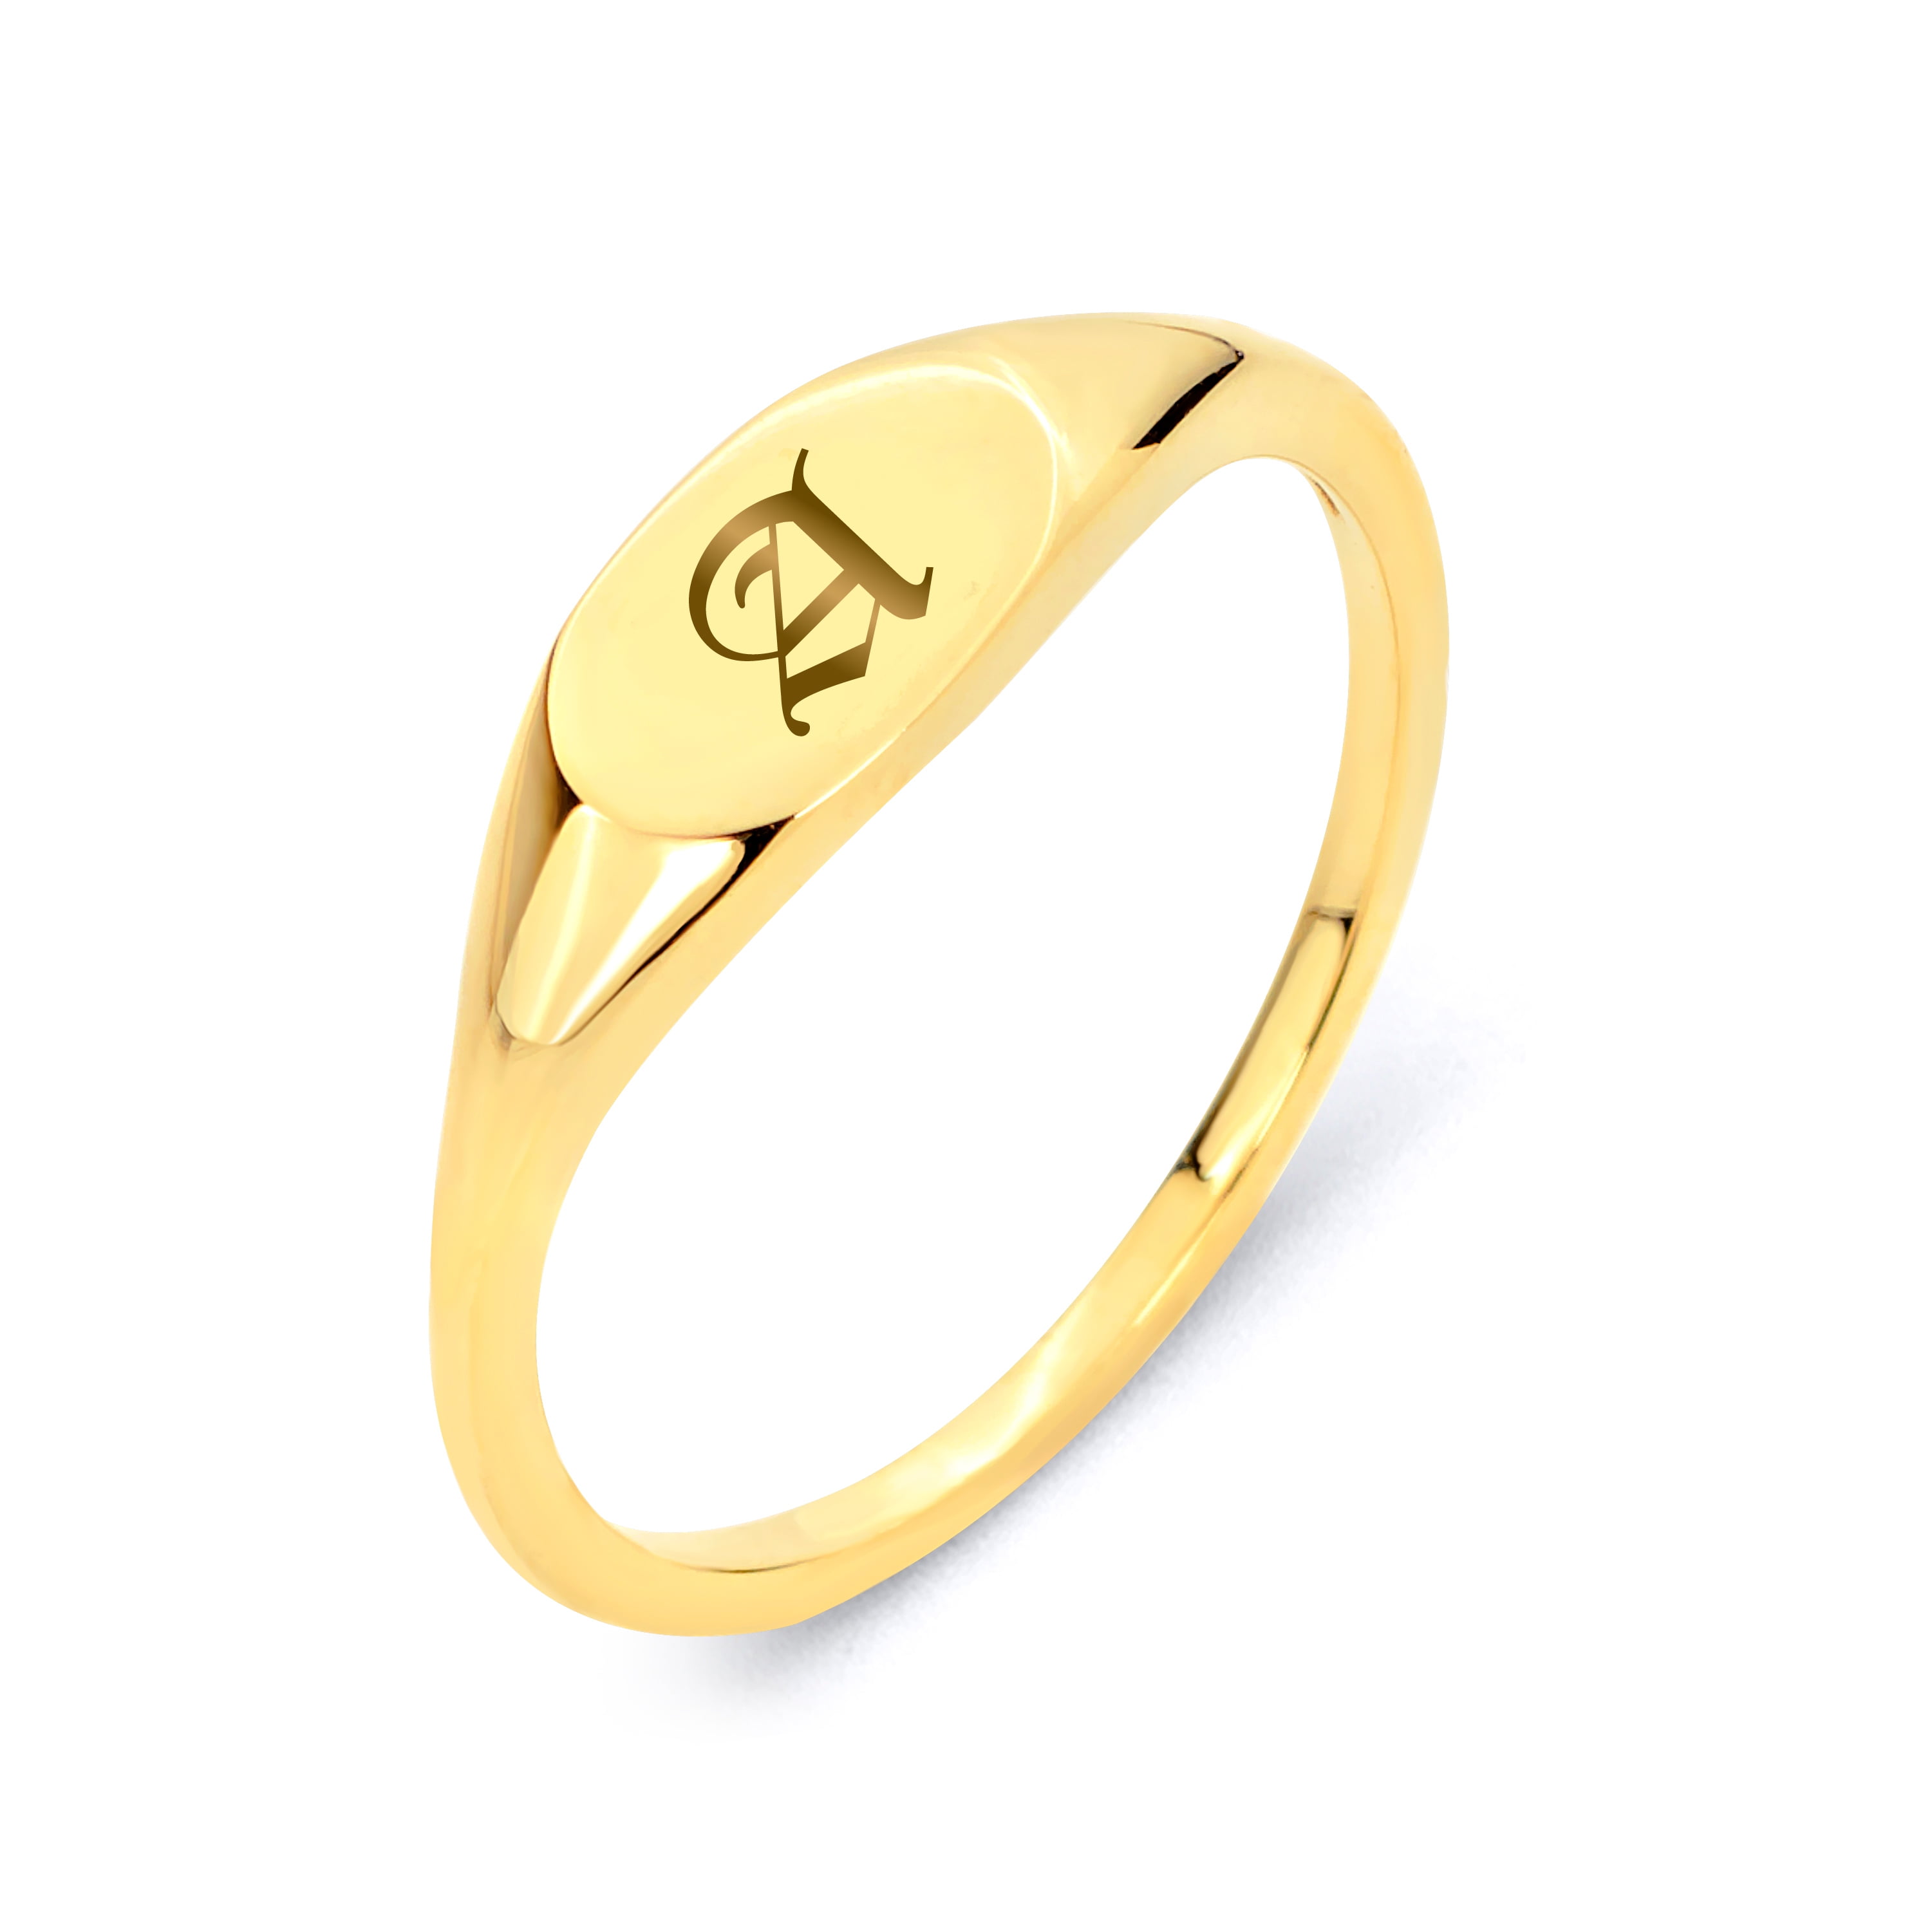 10k Solid Gold Old English Initial Signet Ring - Gift for Her - Letter M Size 4 - Walmart.com